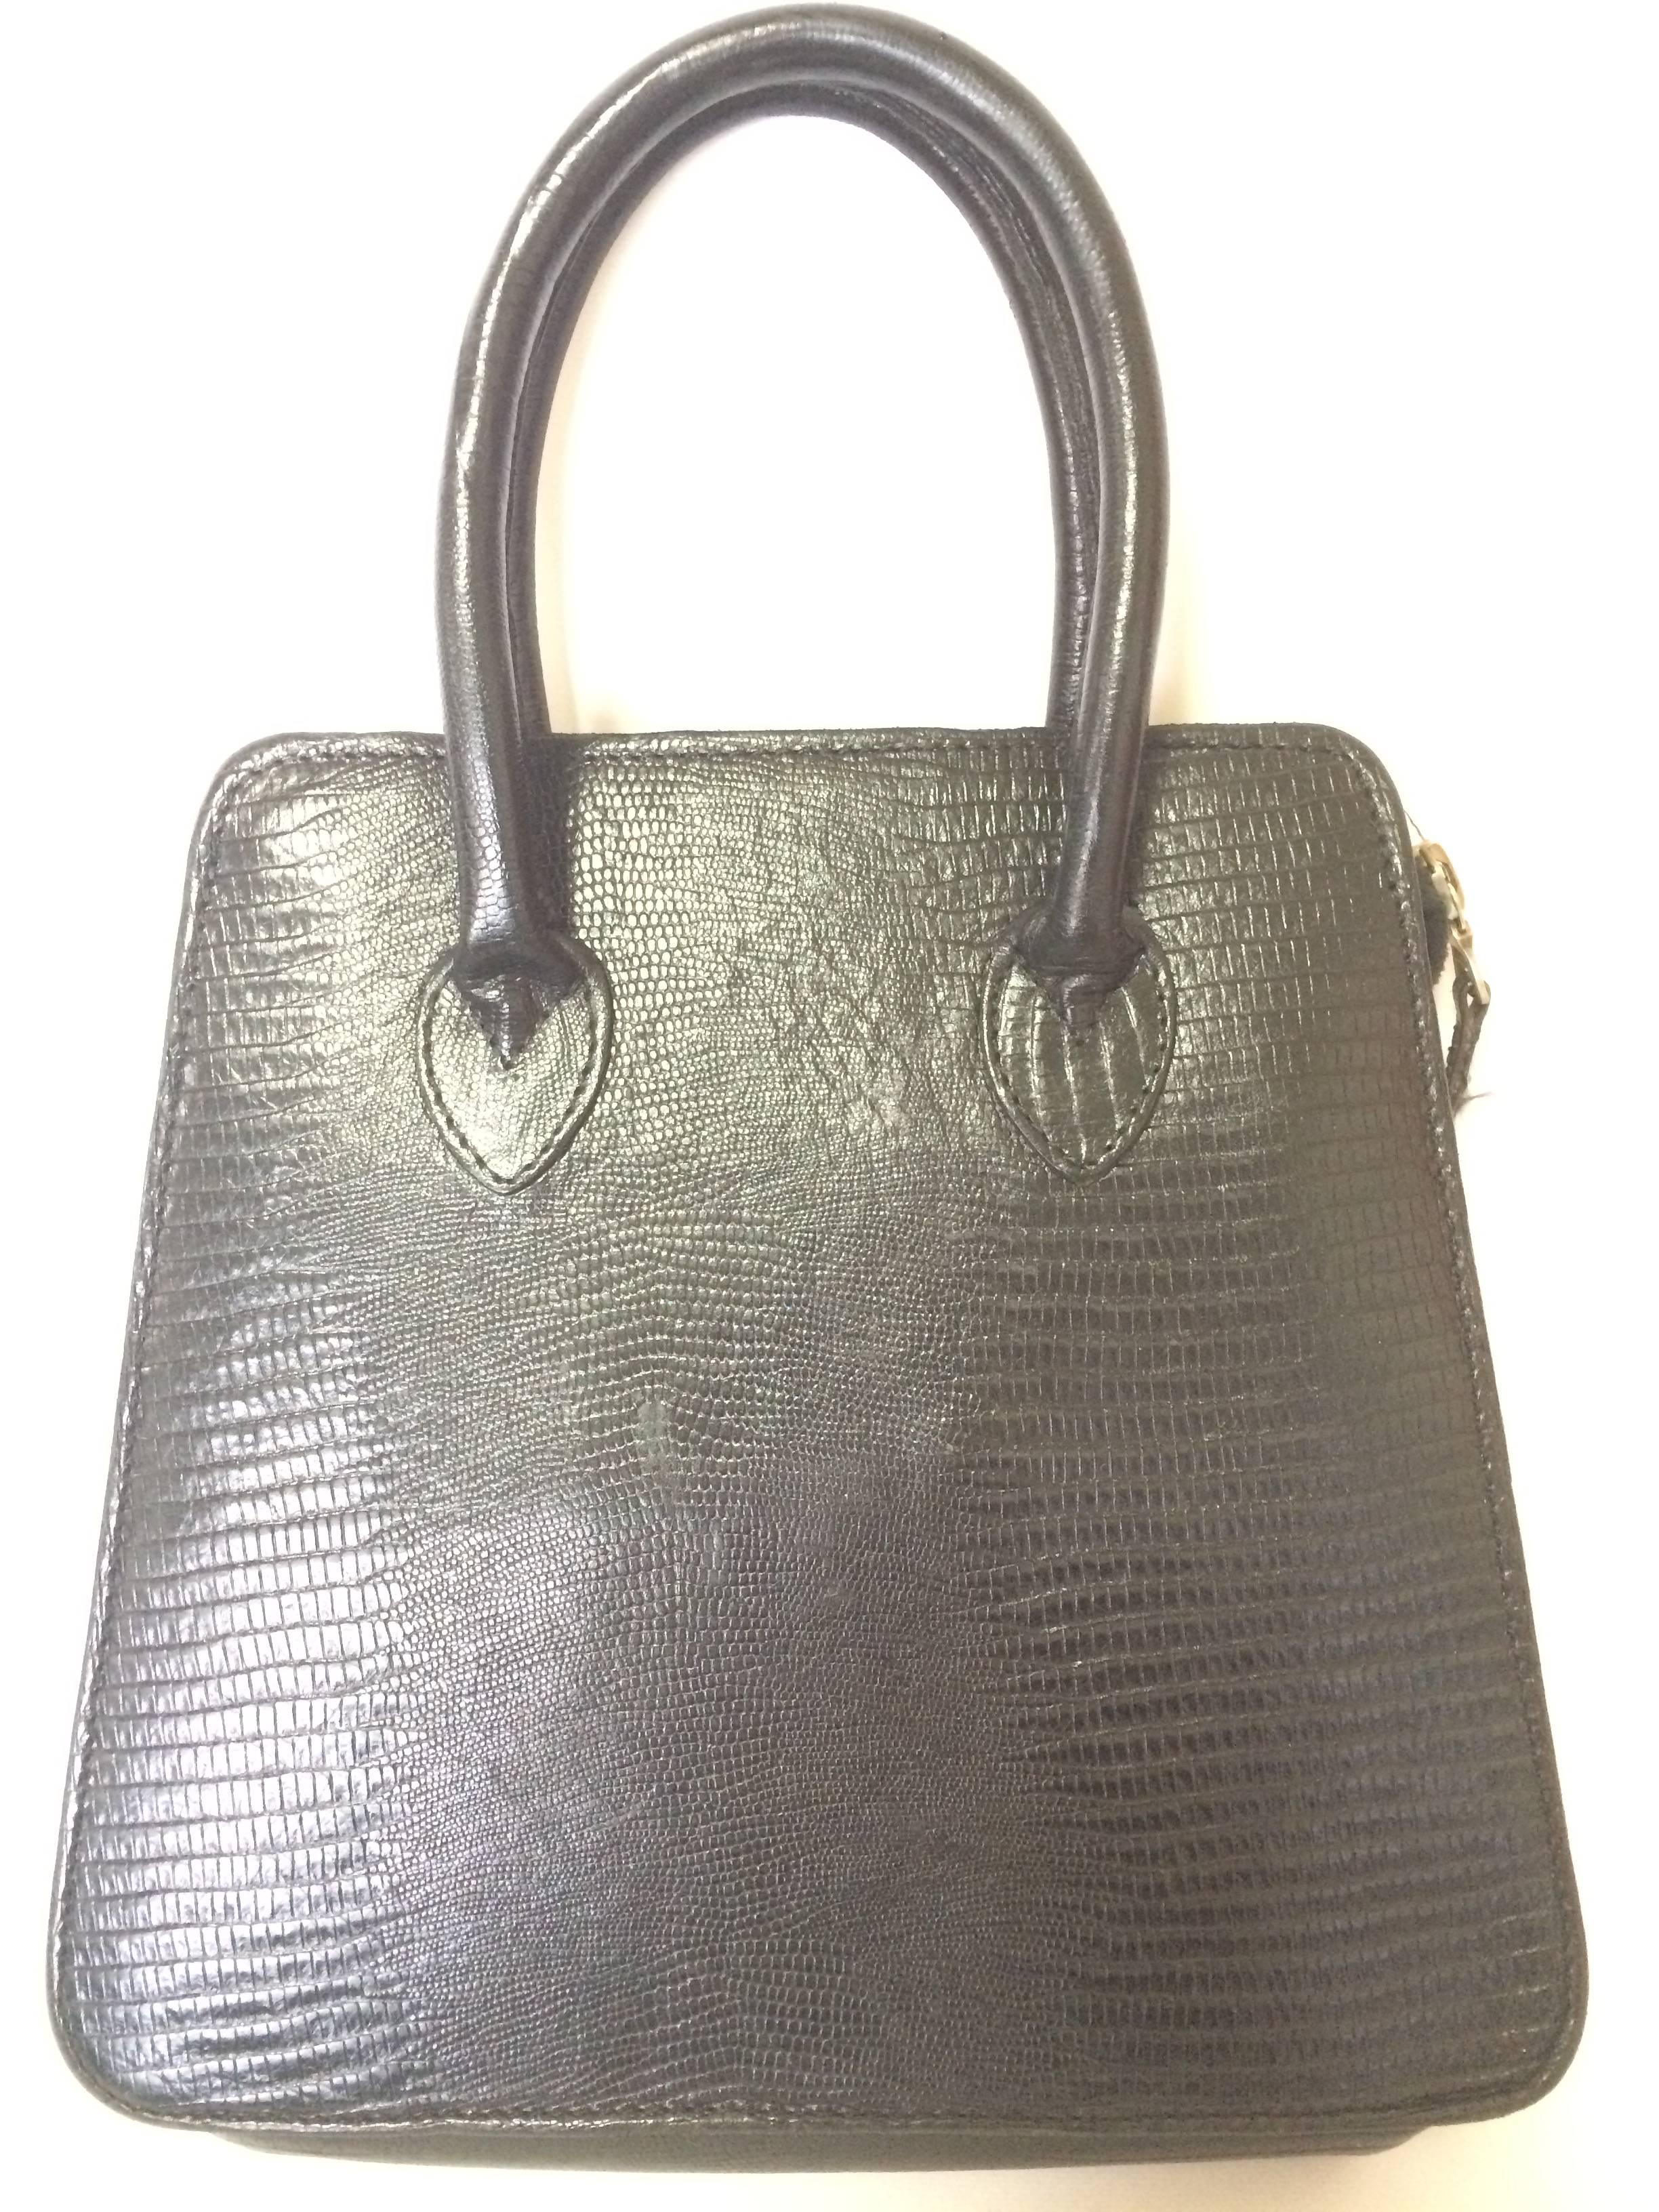 1990s. Vintage Mulberry lizard embossed black leather trapezoid shape mini tote bag. Masterpiece back in the era. Roger Saul era.

This is one old sophisticated masterpiece from Mulberry in the early 90s, Roger Saul era. 
Mini trapezoid shape